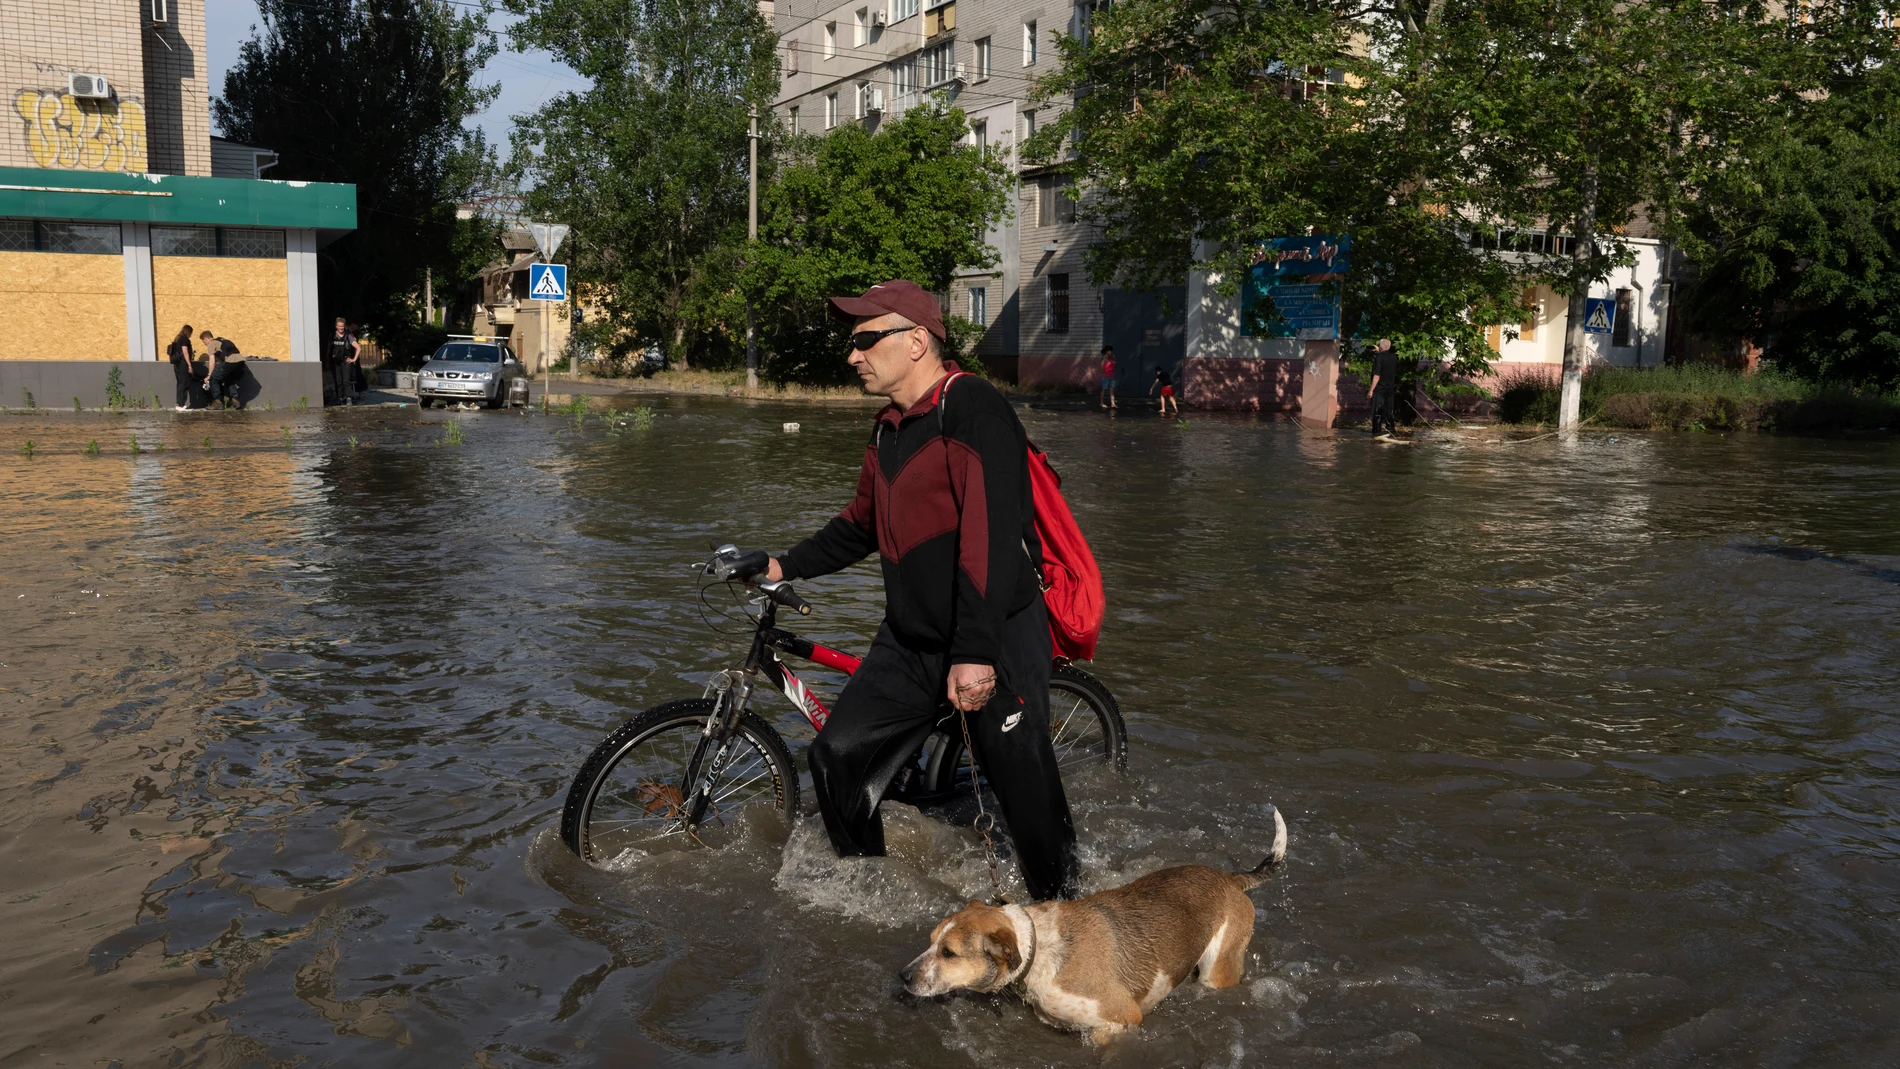 A local resident with a bike and a dog walks along the street past the buildings in Kherson, Ukraine, Tuesday, Jun 6, 2023 which were flooded after the Kakhovka dam was blown up overnight. The wall of a major dam in a part of southern Ukraine has collapsed, triggering floods, endangering Europe's largest nuclear power plant and threatening drinking water supplies. (AP Photo/Evgeniy Maloletka)